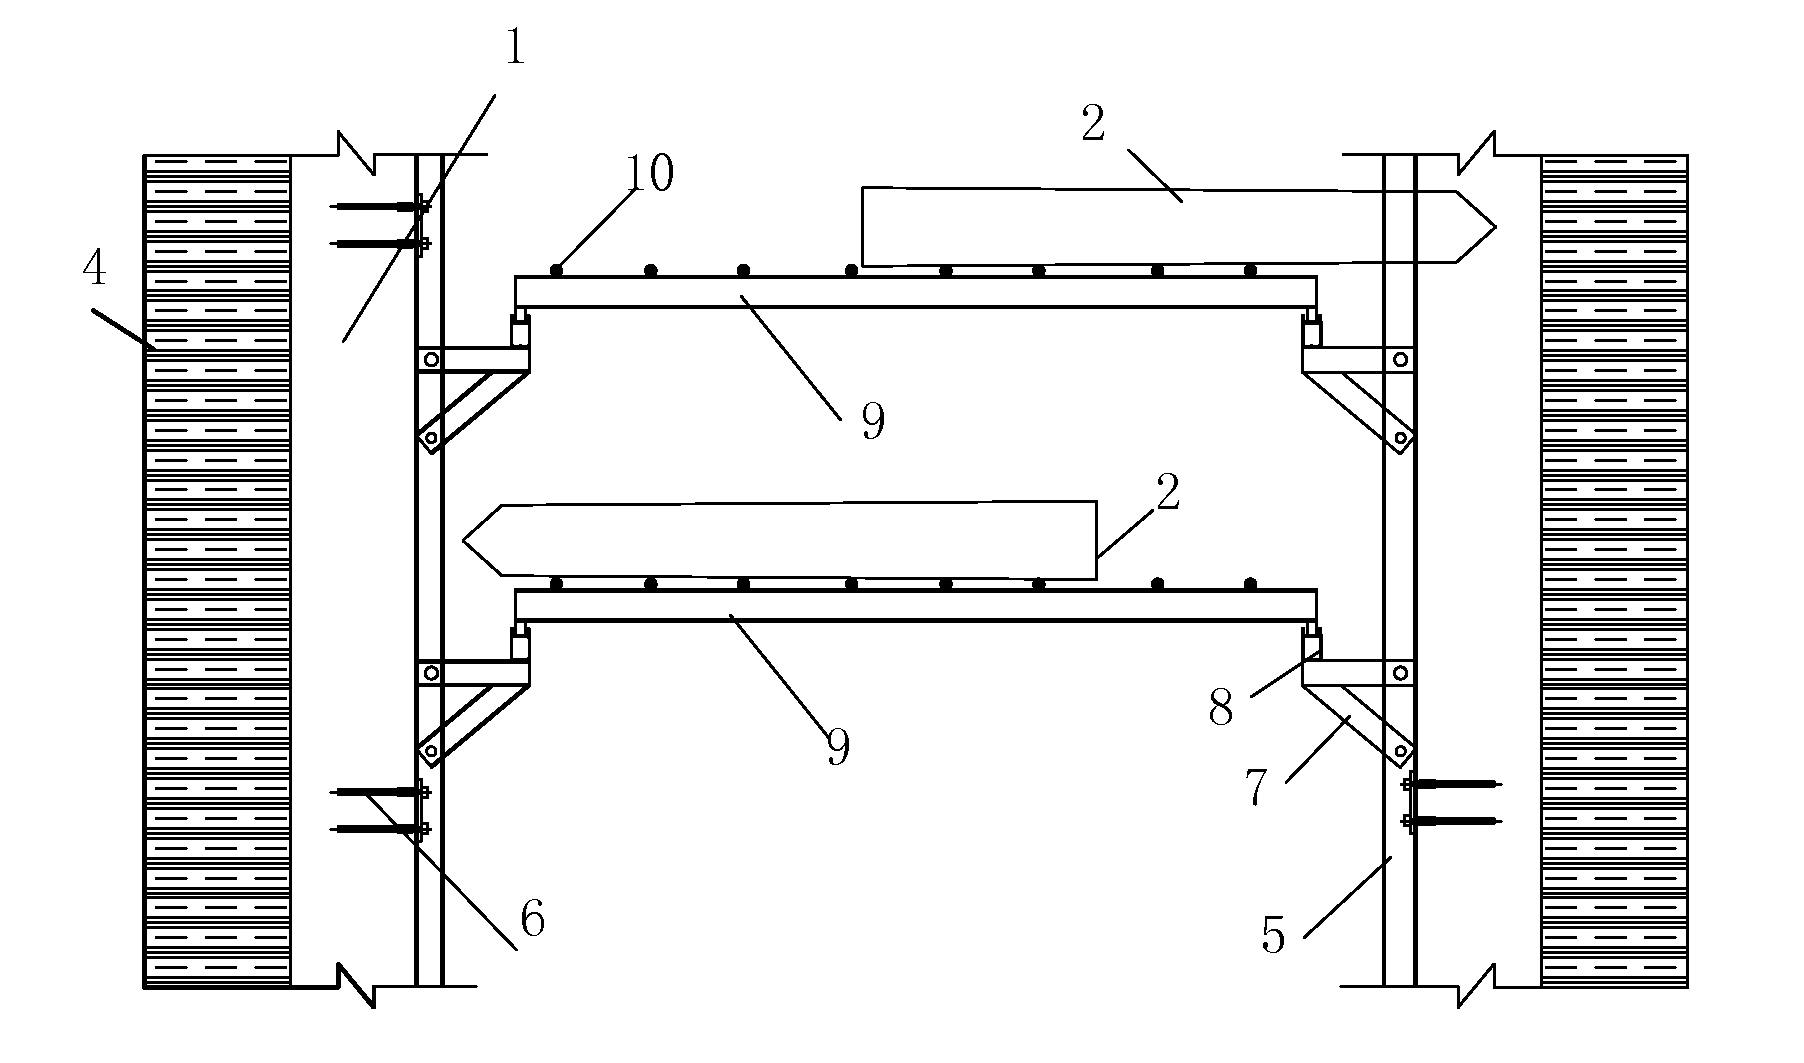 Construction method for root-type foundation anchorage and bored, root-type cast in-situ pile with anchor bolts